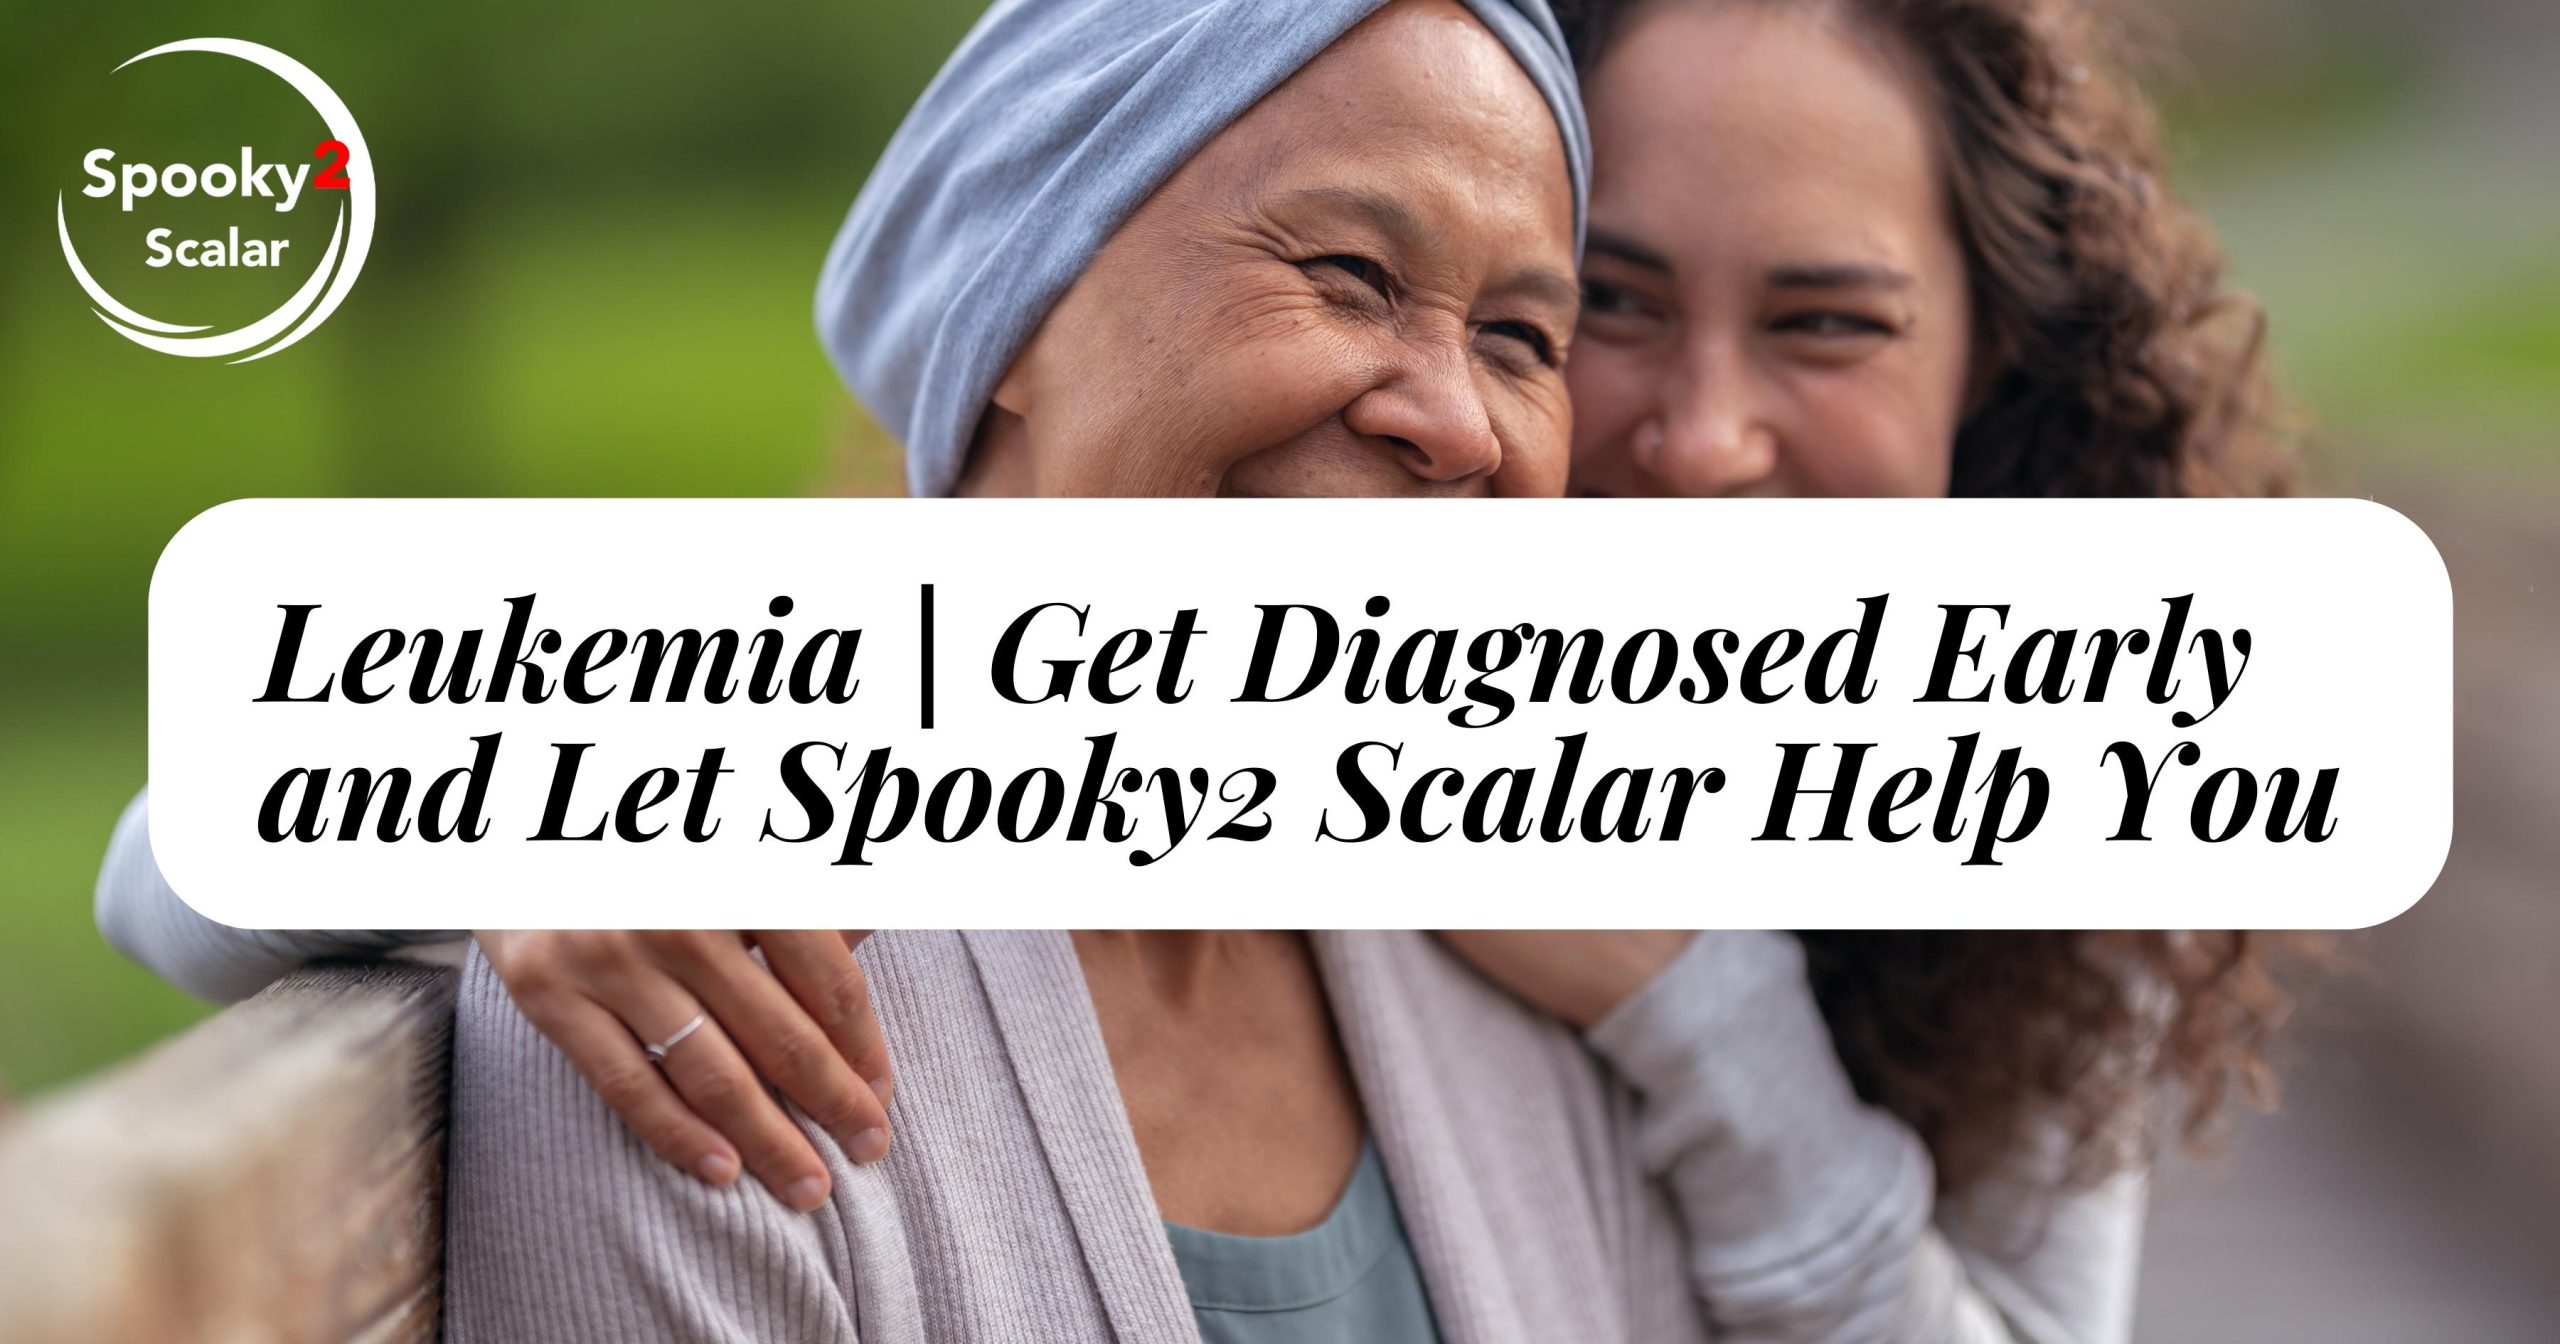 Leukemia | Get Diagnosed Early and Let Spooky2 Scalar Help You